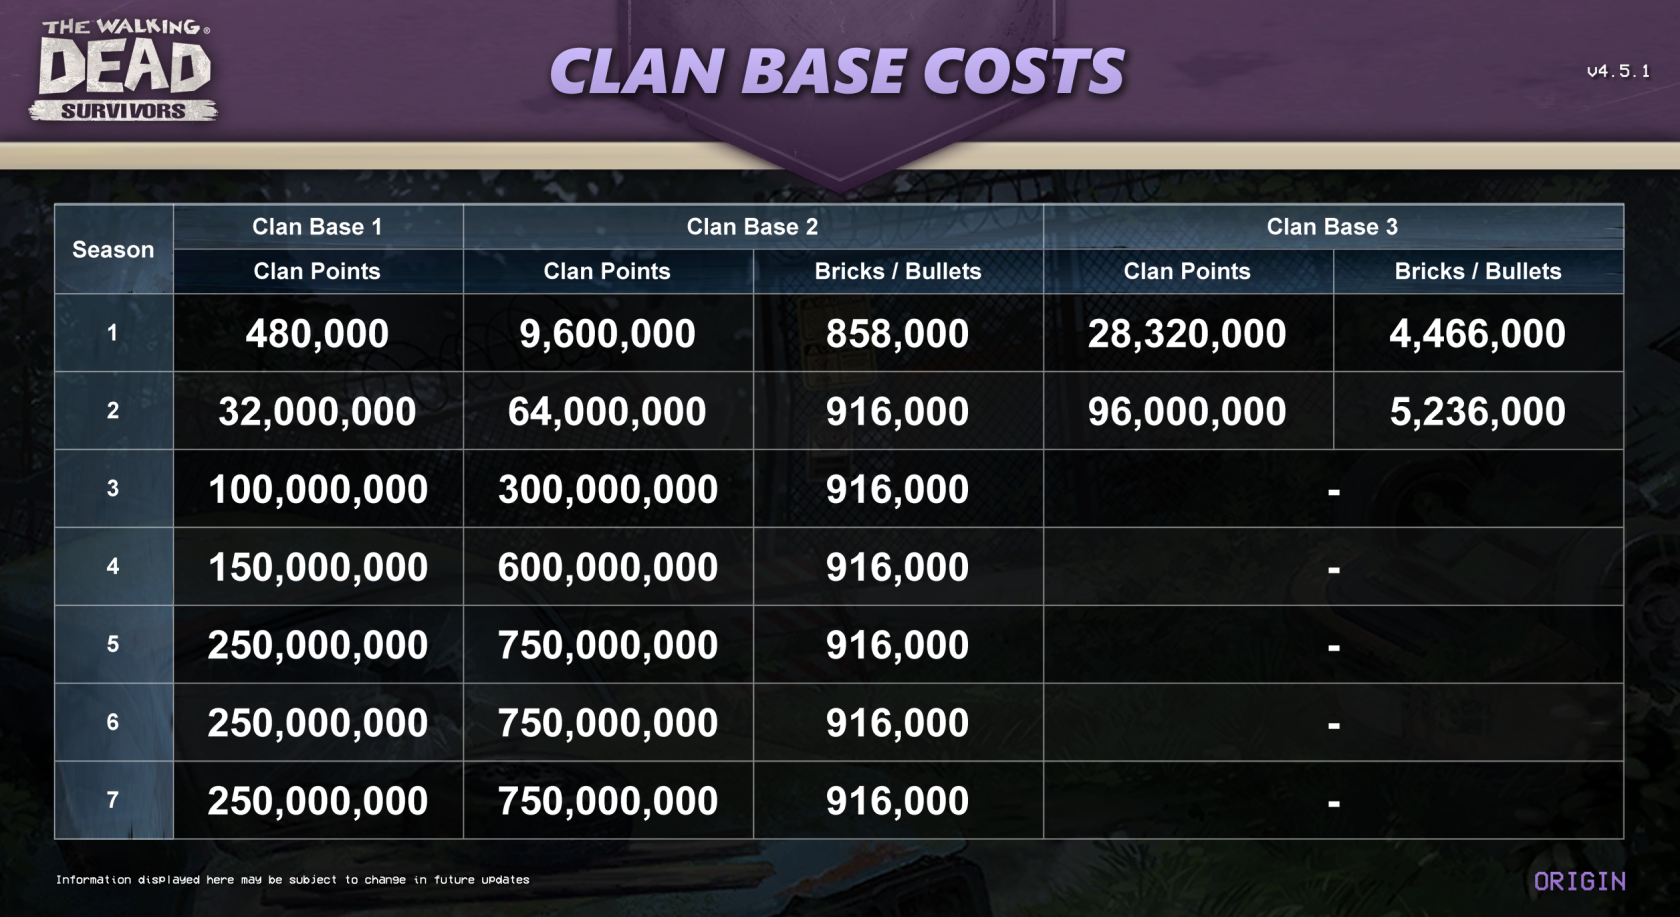 ClanBaseCosts.png